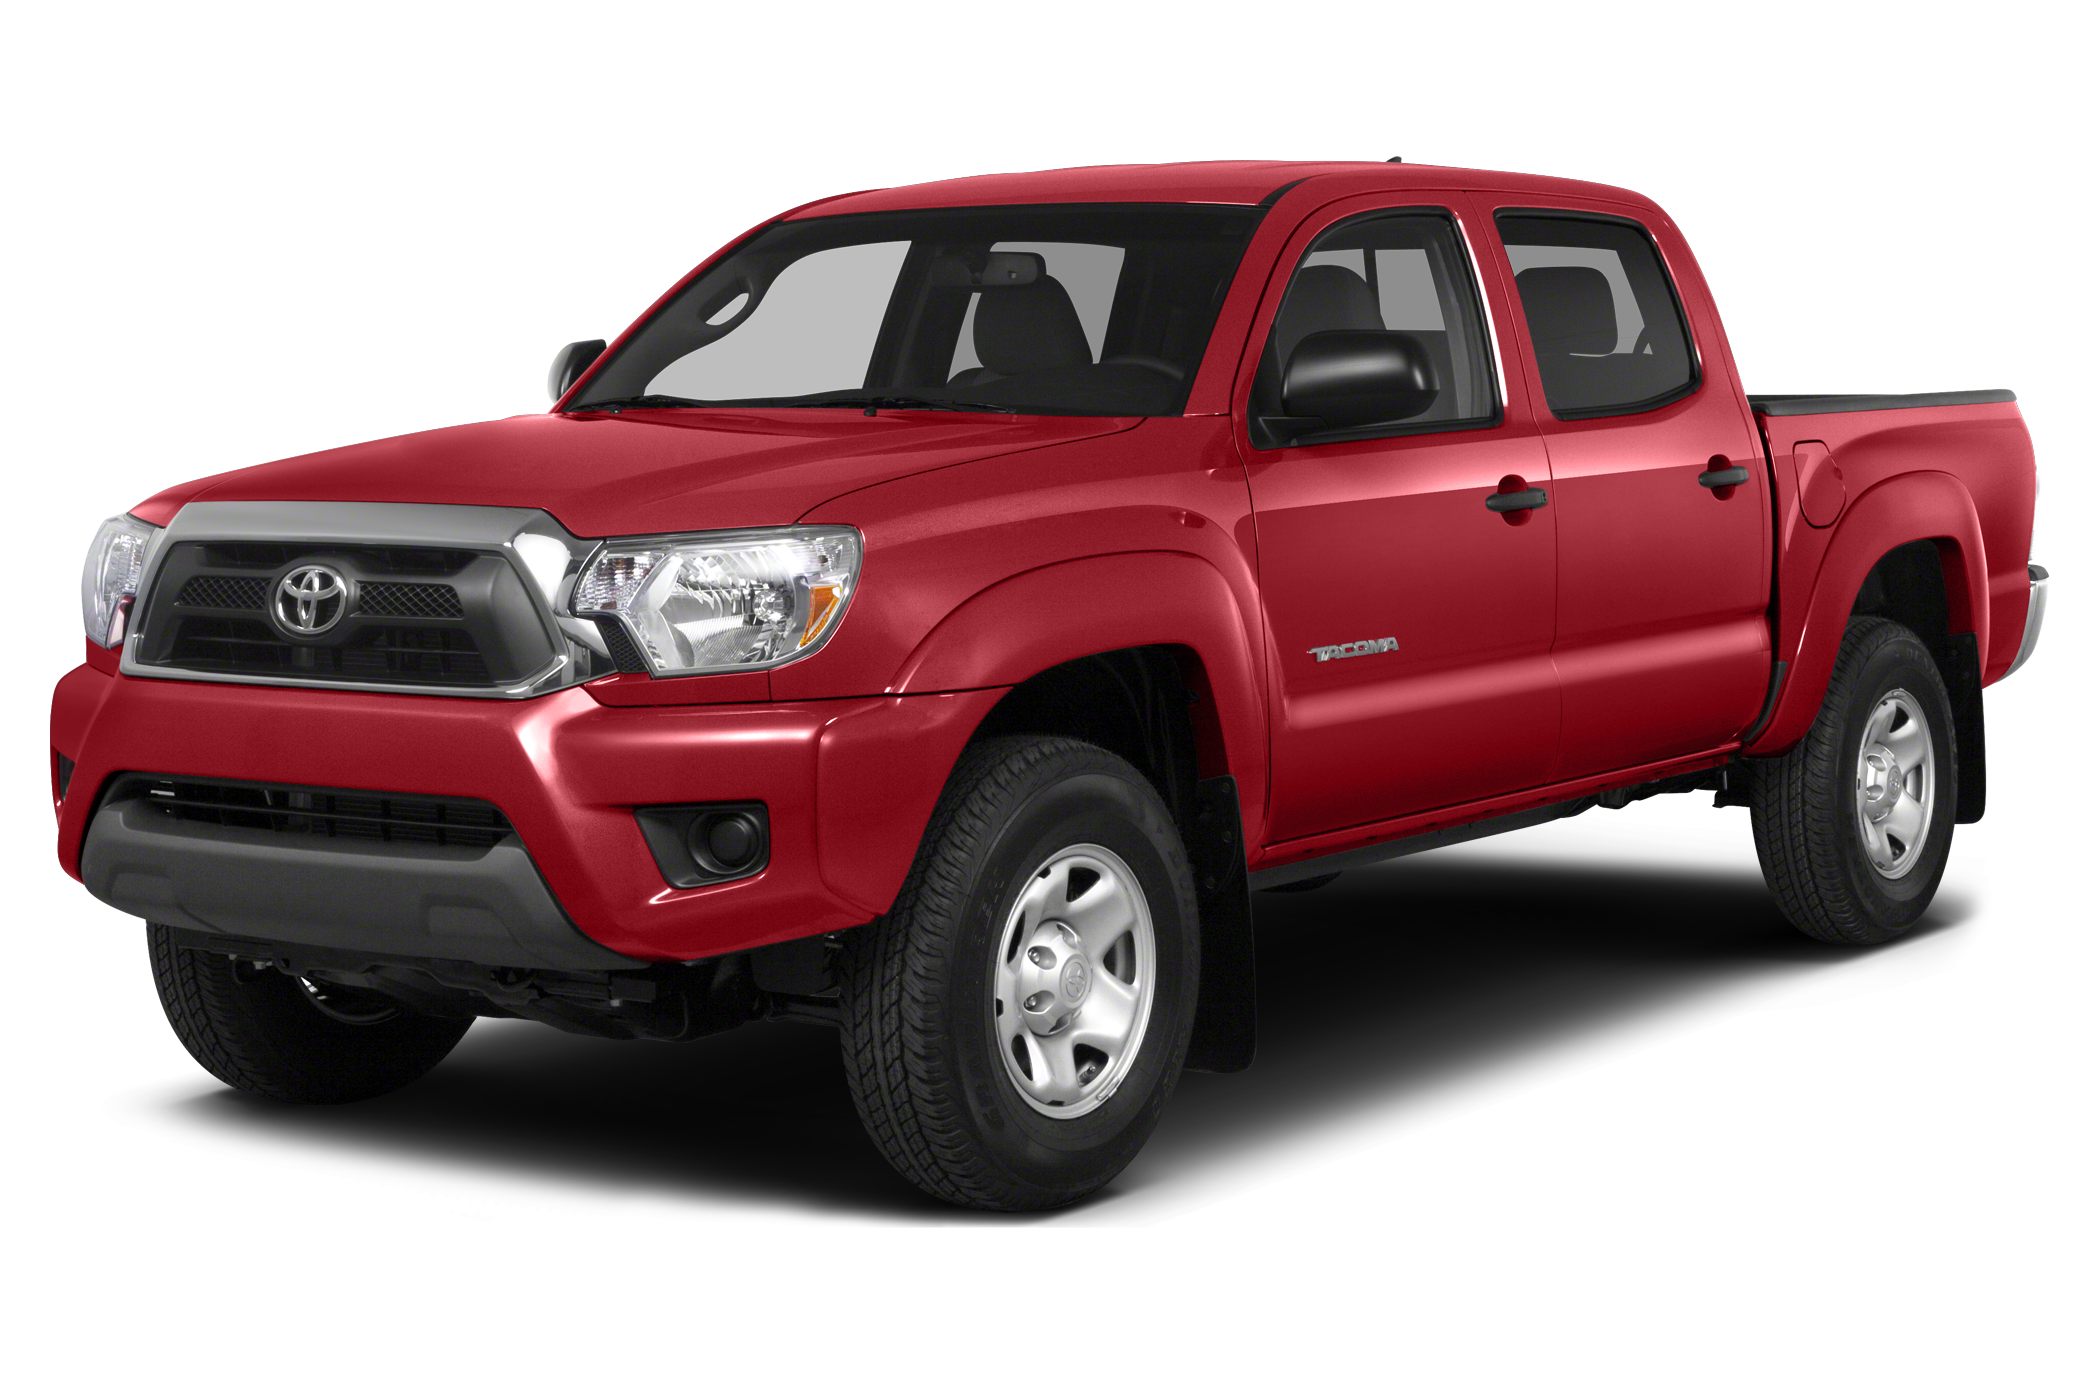 2013 Toyota Tacoma oem parts and accessories on sale